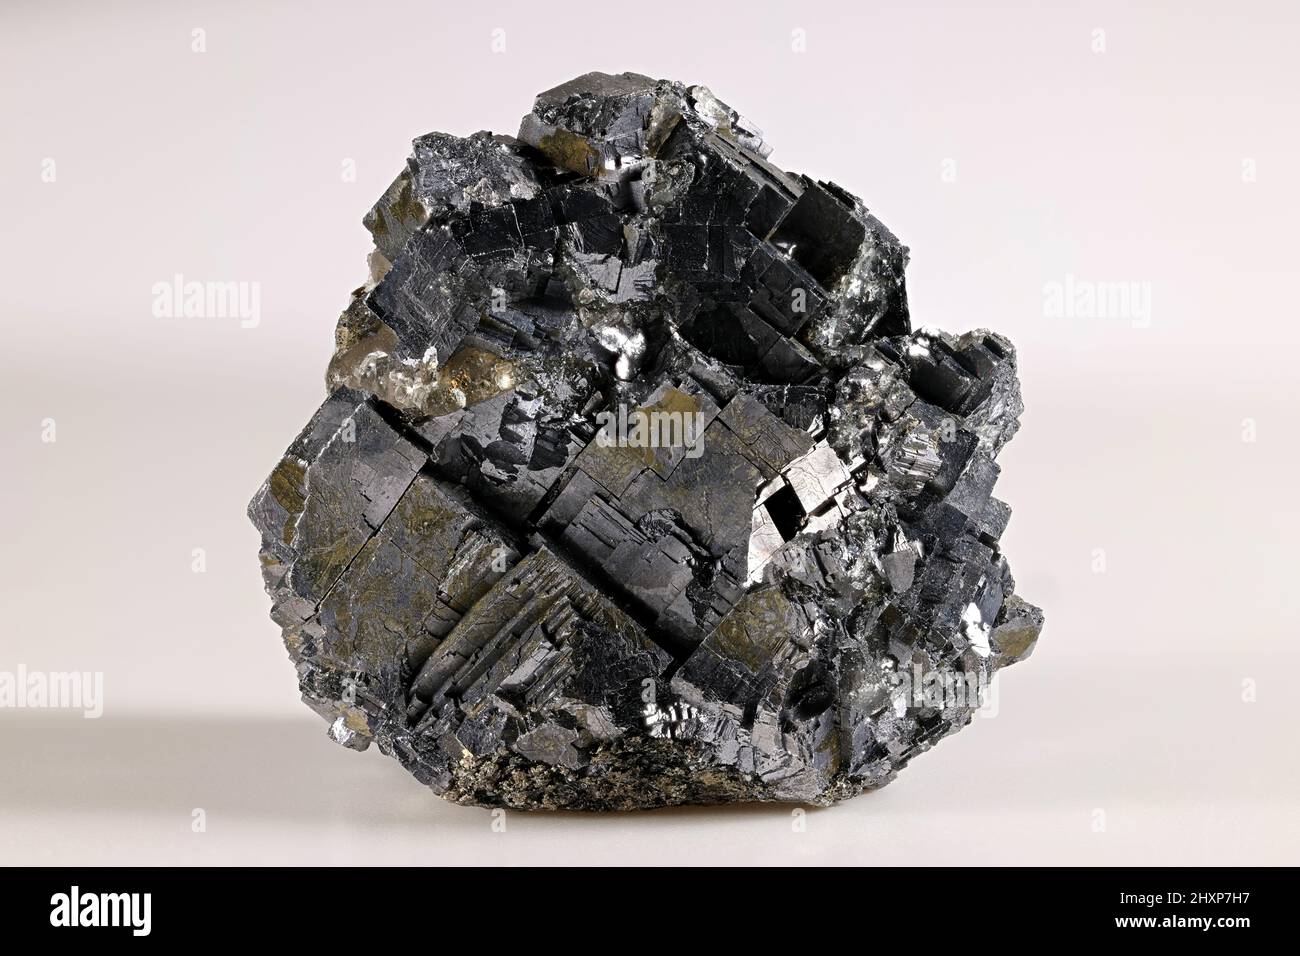 Crystals of Galena, also called Lead glance.  Galena is the most important industrial ore of lead. Stock Photo